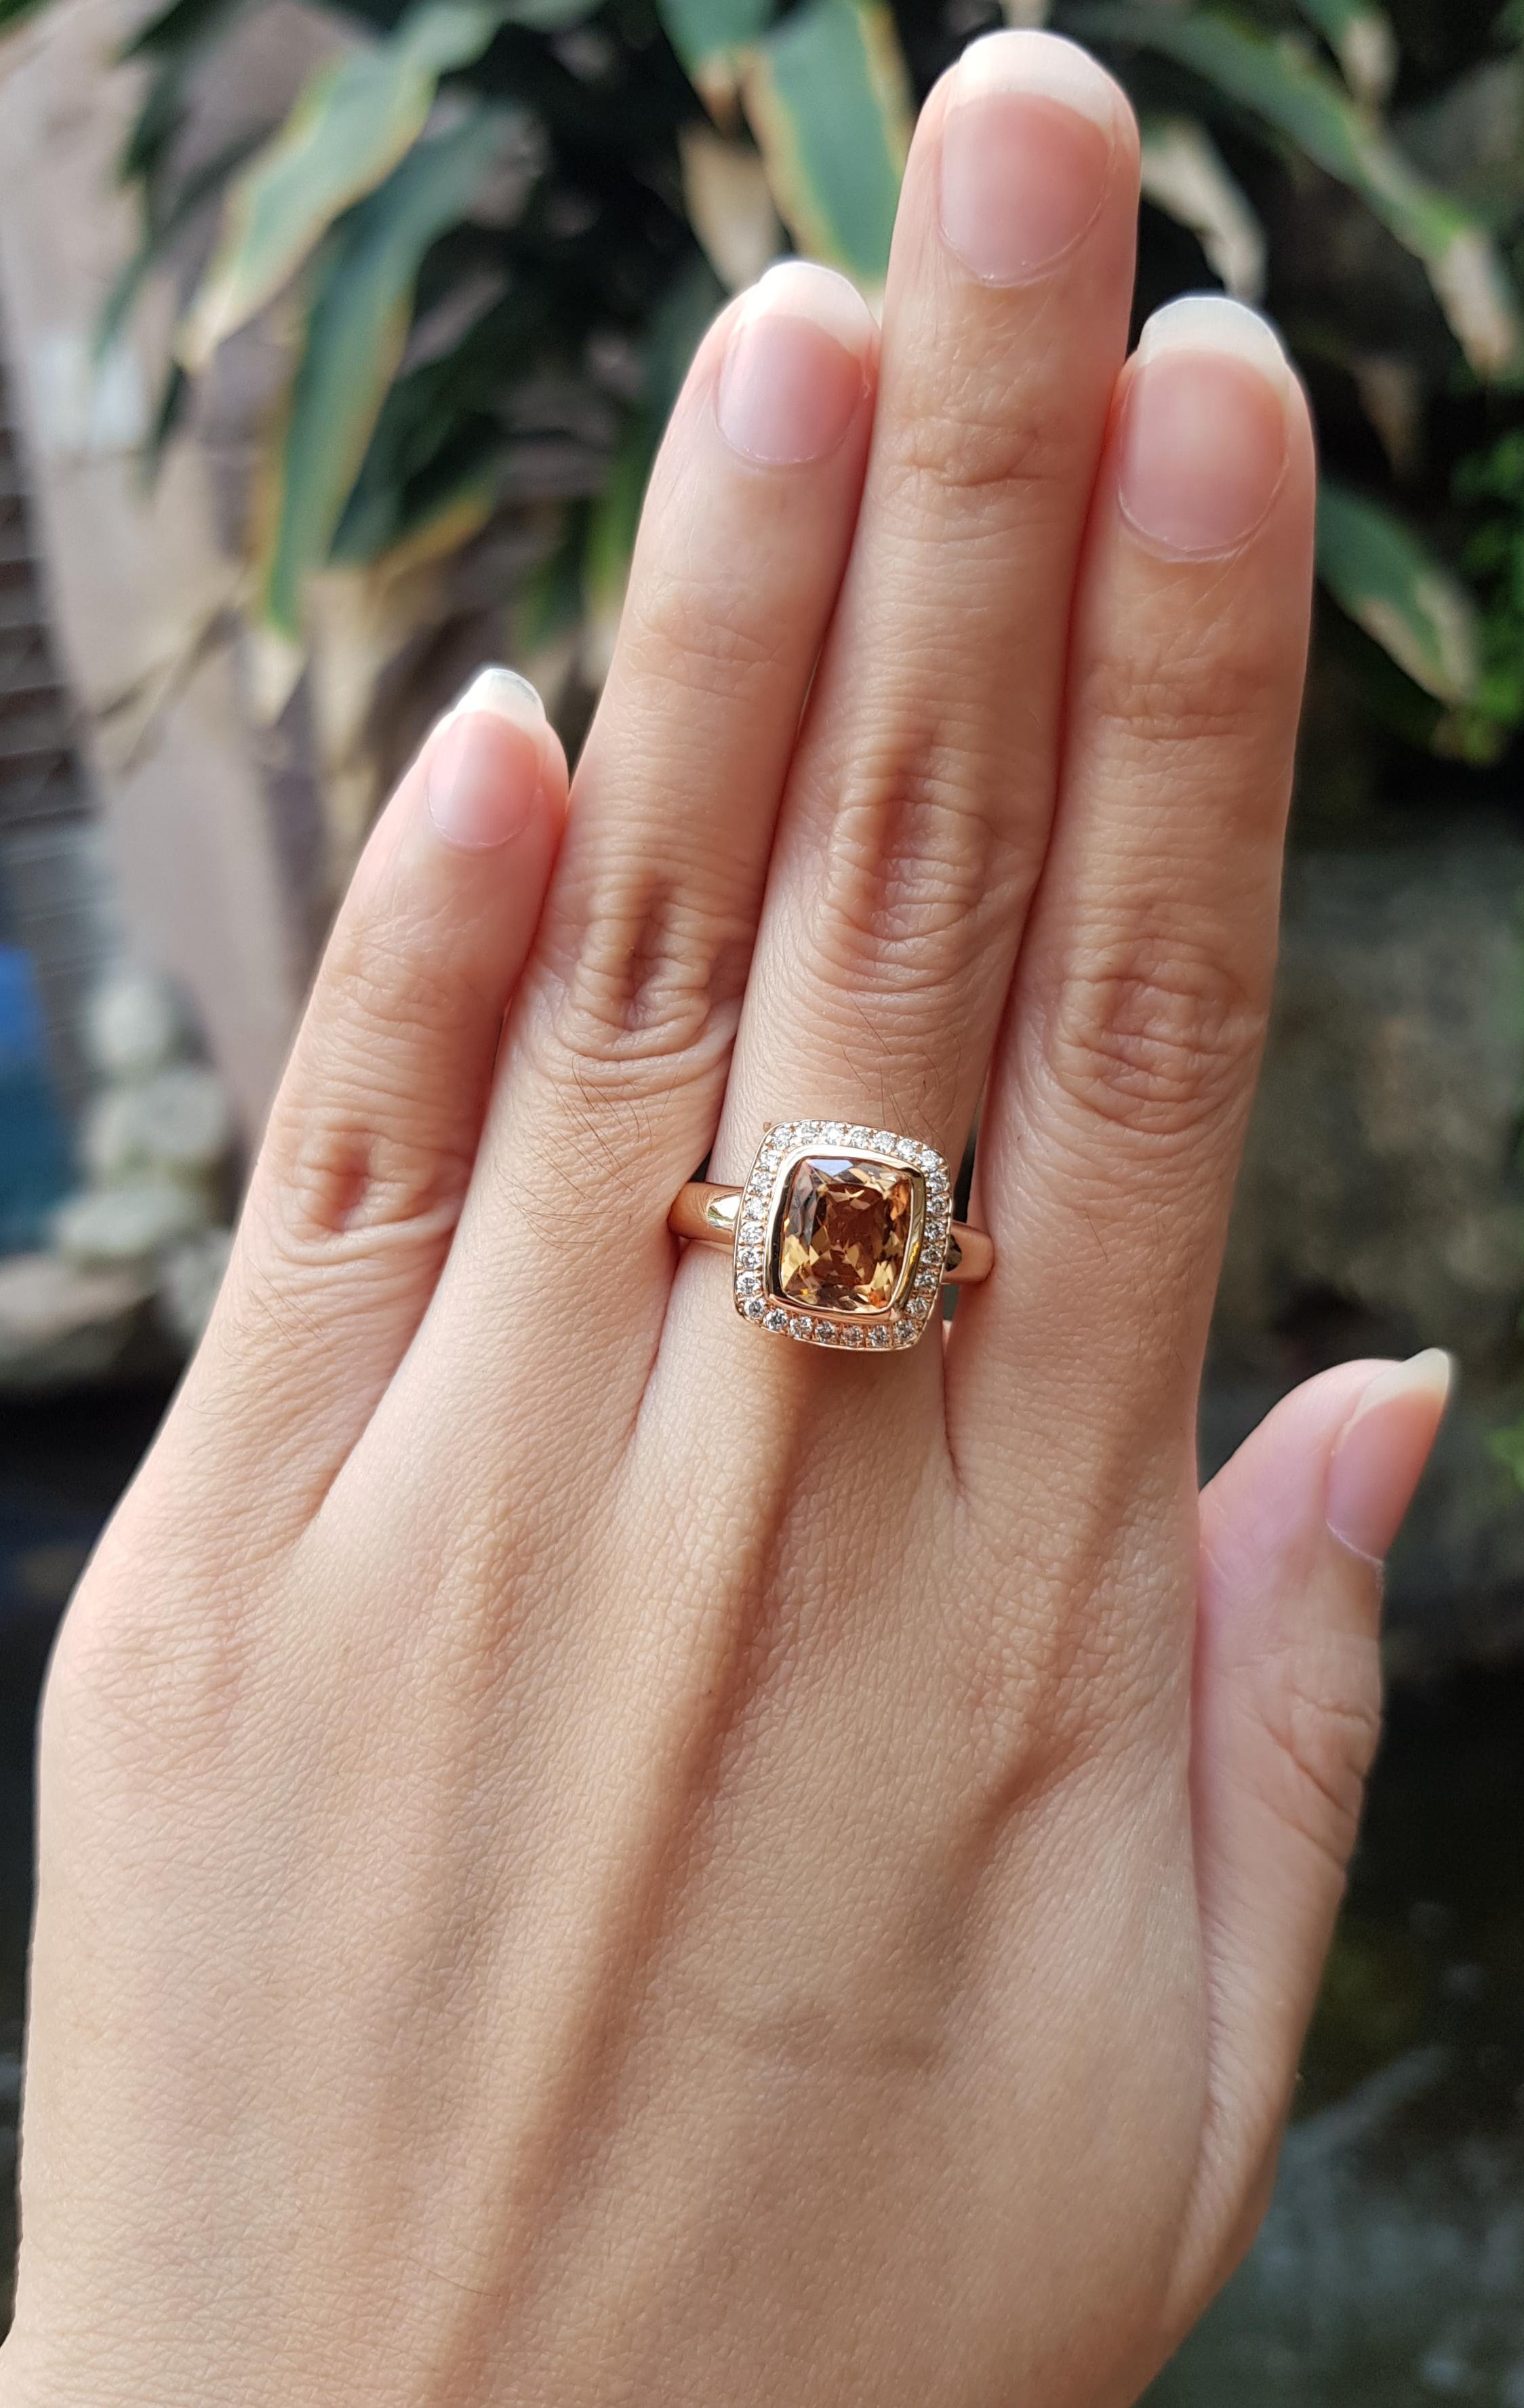 Imperial Topaz 2.88 carats with Brown Diamond 0.28 carat Ring set in 18 Karat Rose Gold Settings

Width:  1.2 cm 
Length: 1.2 cm
Ring Size: 55
Total Weight: 8.67 grams

